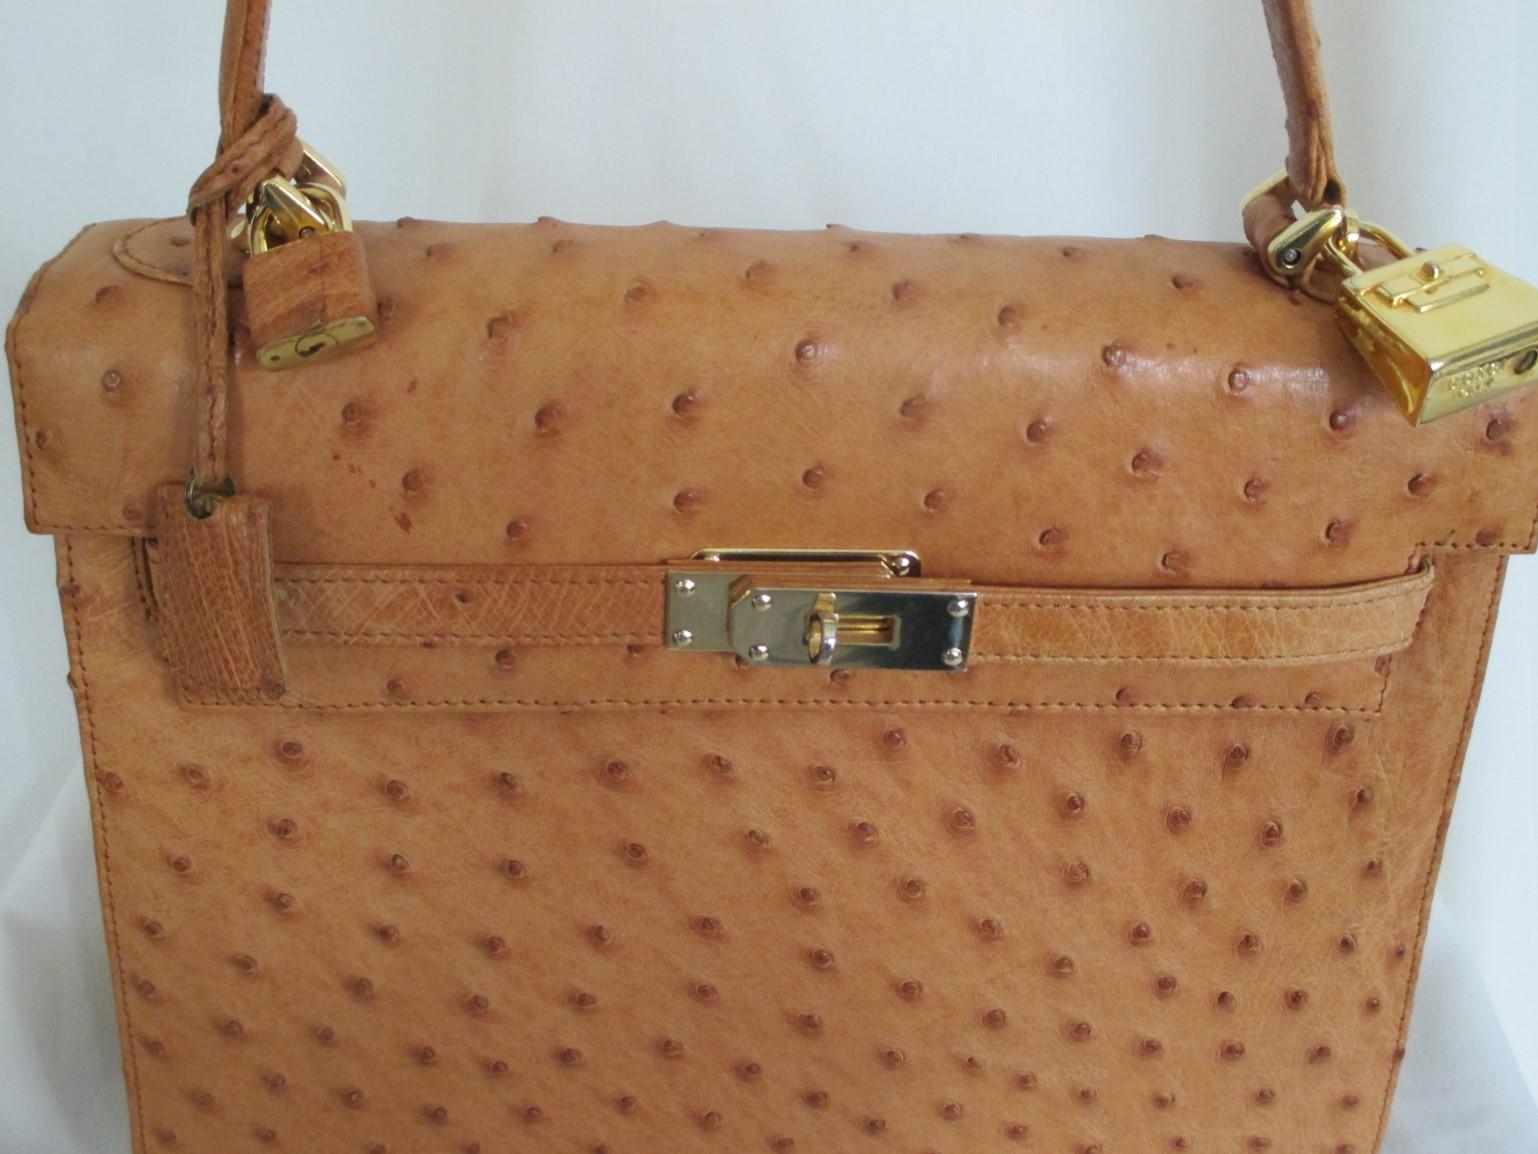 Rare vintage ostrich leather Kelly style handbag. 
Handmade by Cape Cobra, leather luxury goods.
This bag is made of cognac color ostrich leather with gold hardware and a front closure.
The lining has 1 zip pocket and 2 pockets.
This outside is in